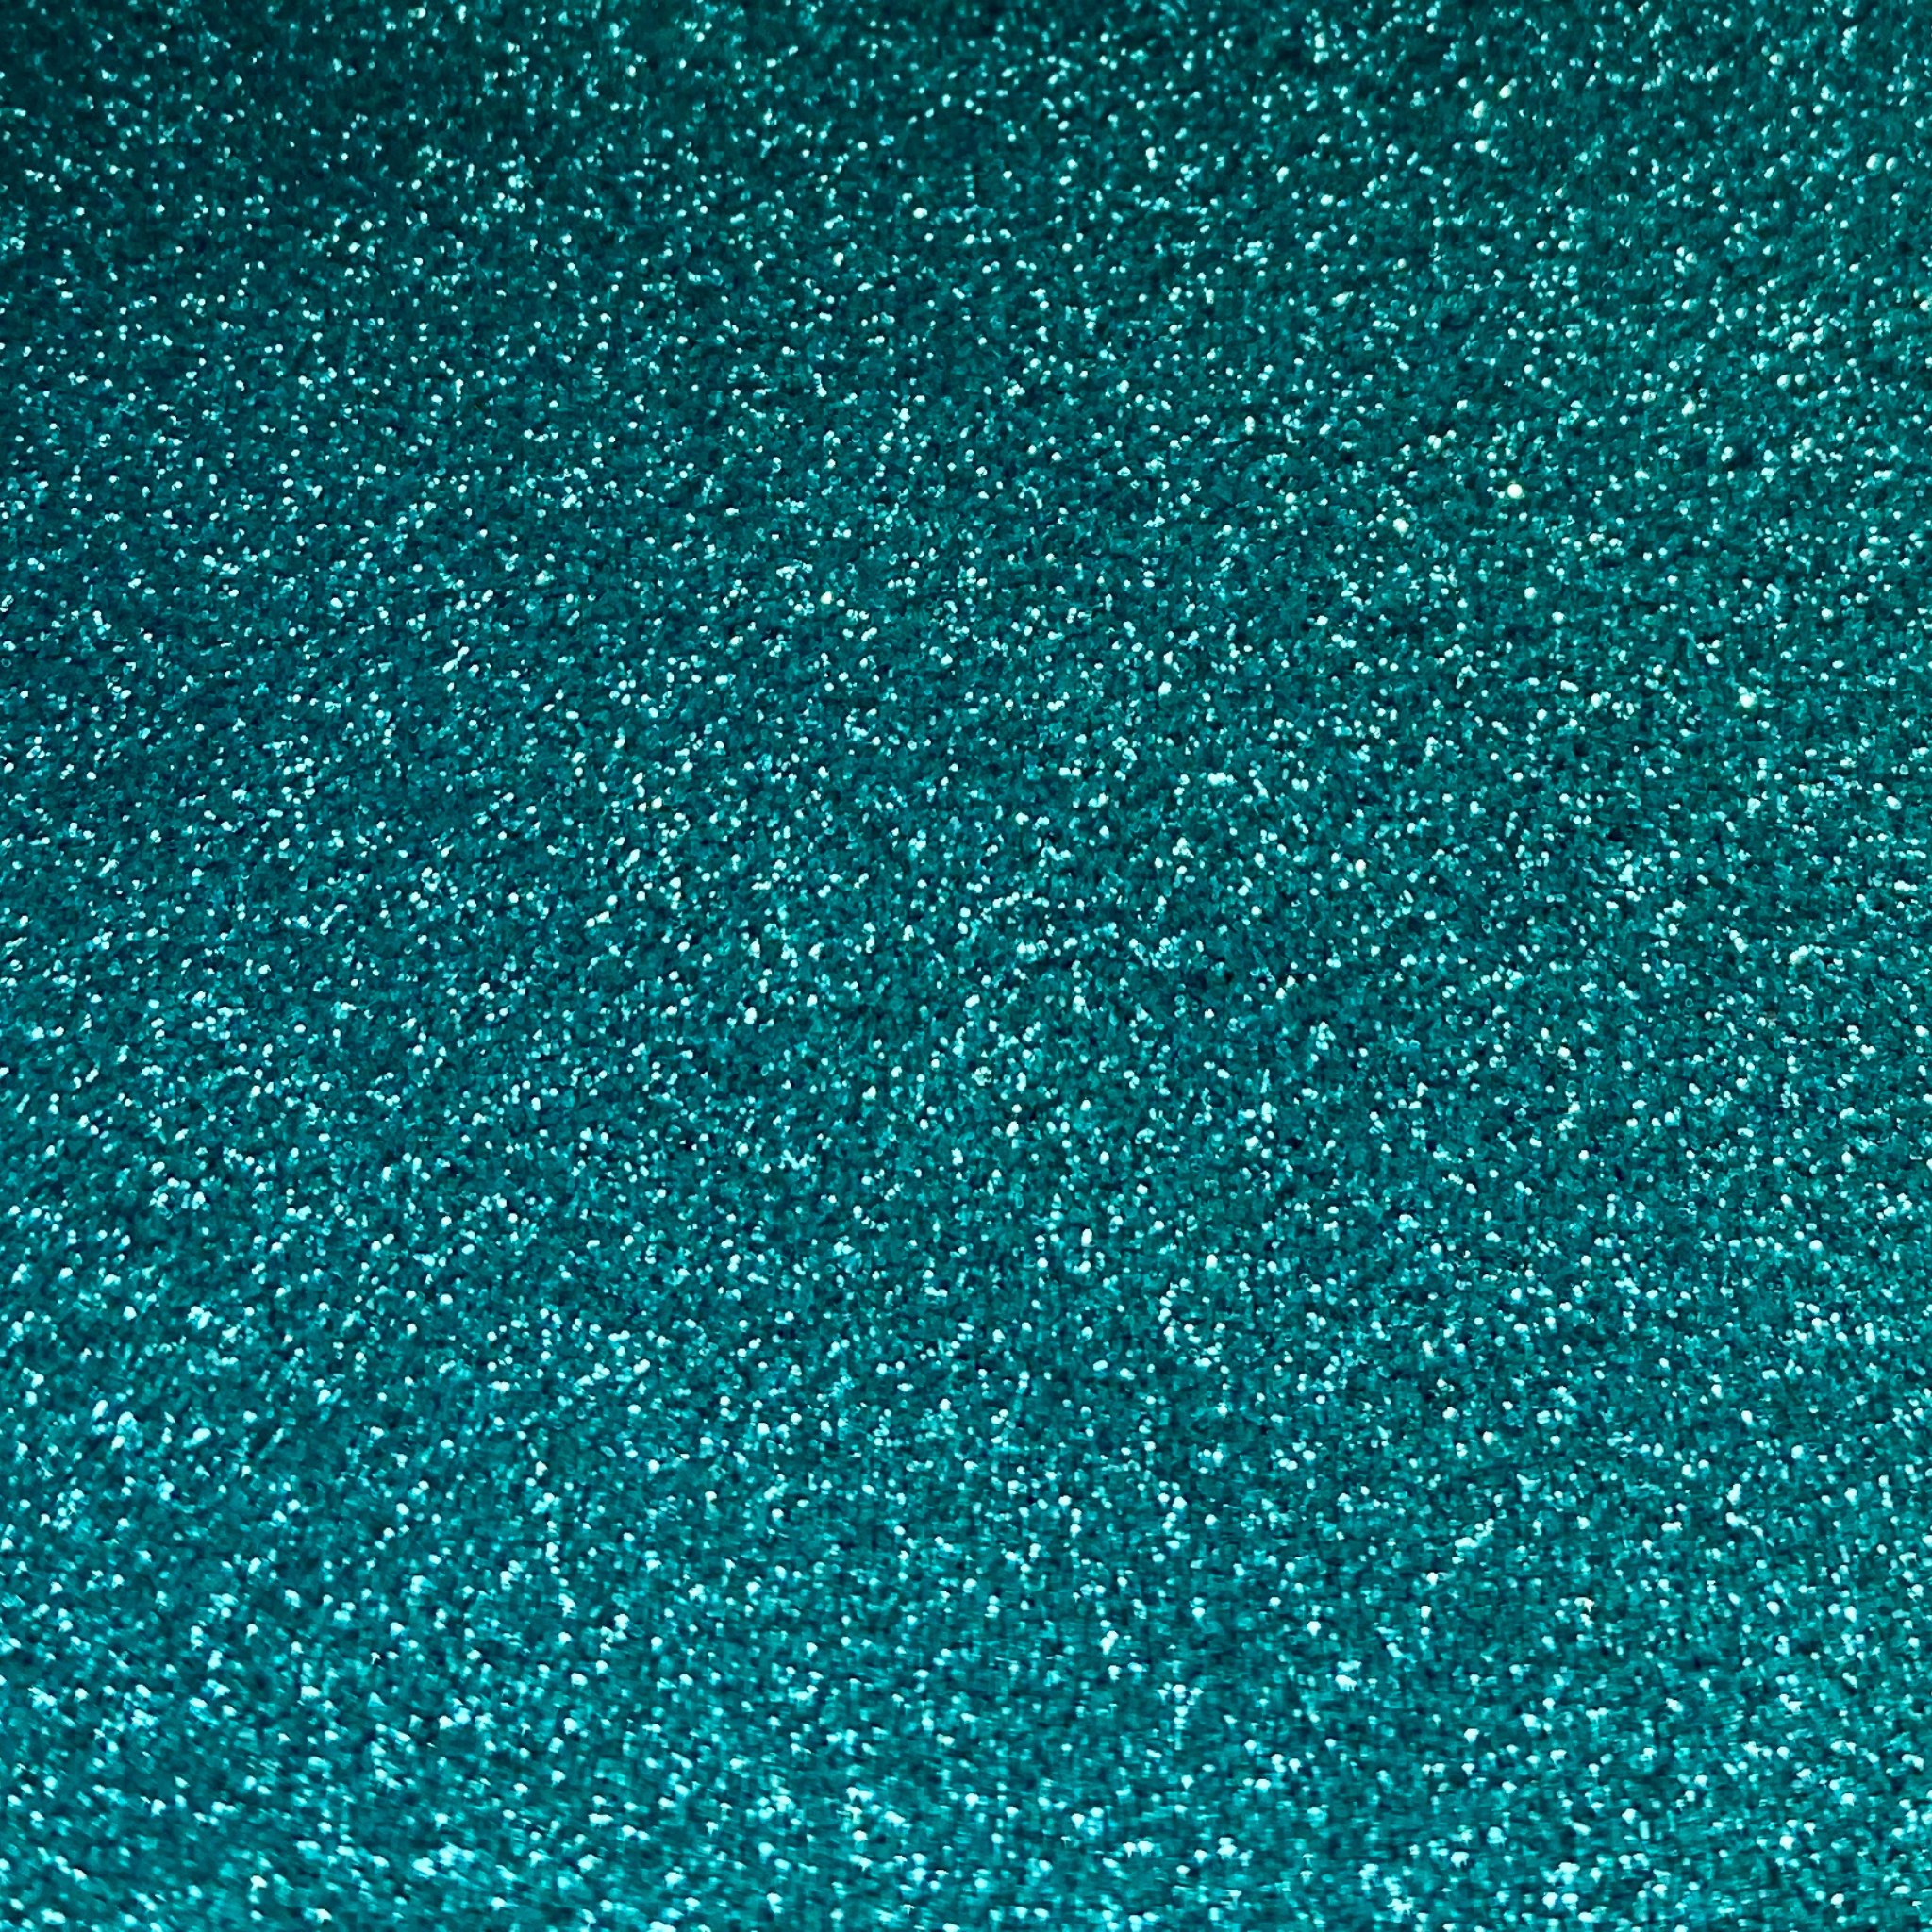 Fine turquoise biodegradable glitter close up. Perfect for glitter nail art.